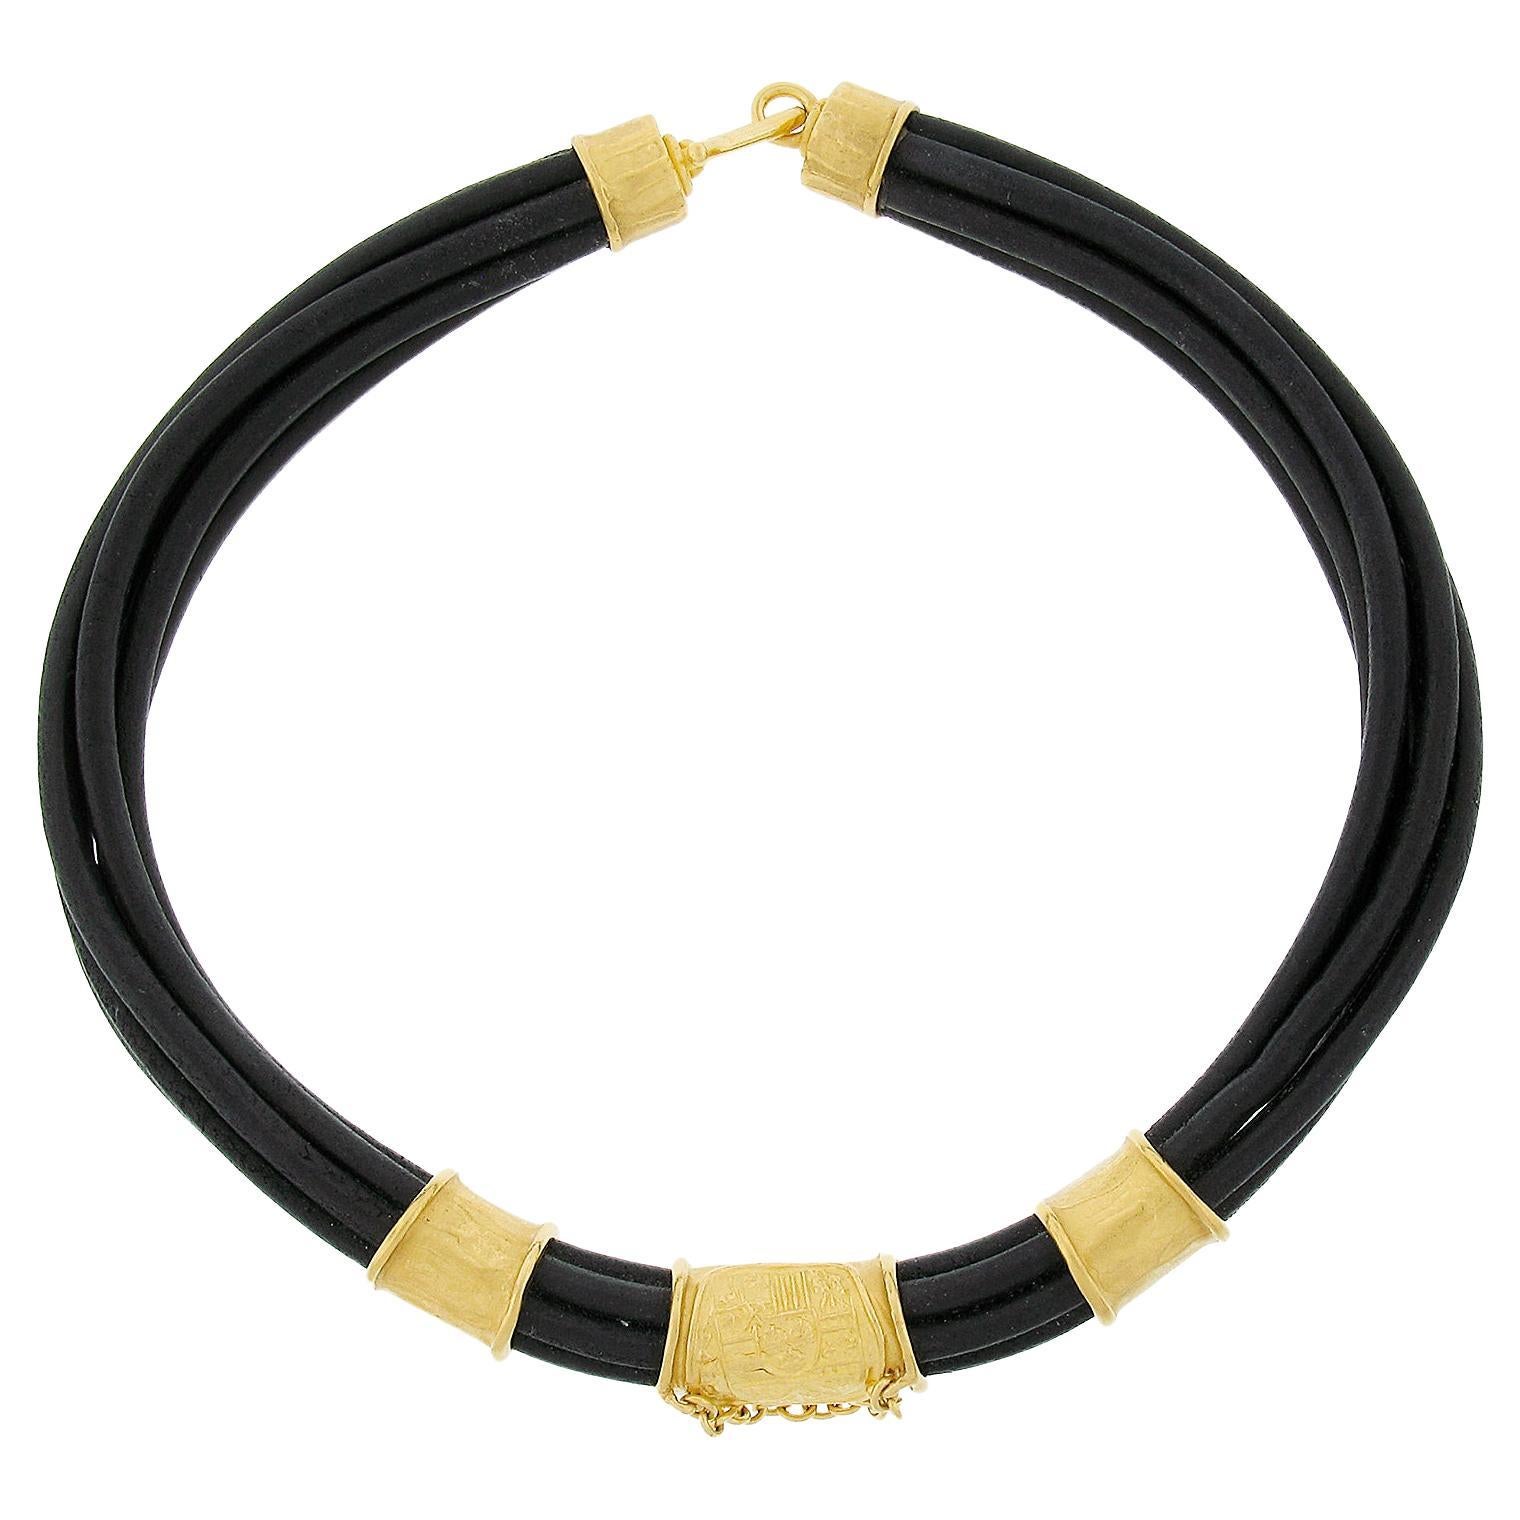 Denise Roberge 22k Gold Black Leather Cord Choker Necklace w/ Slide Charms